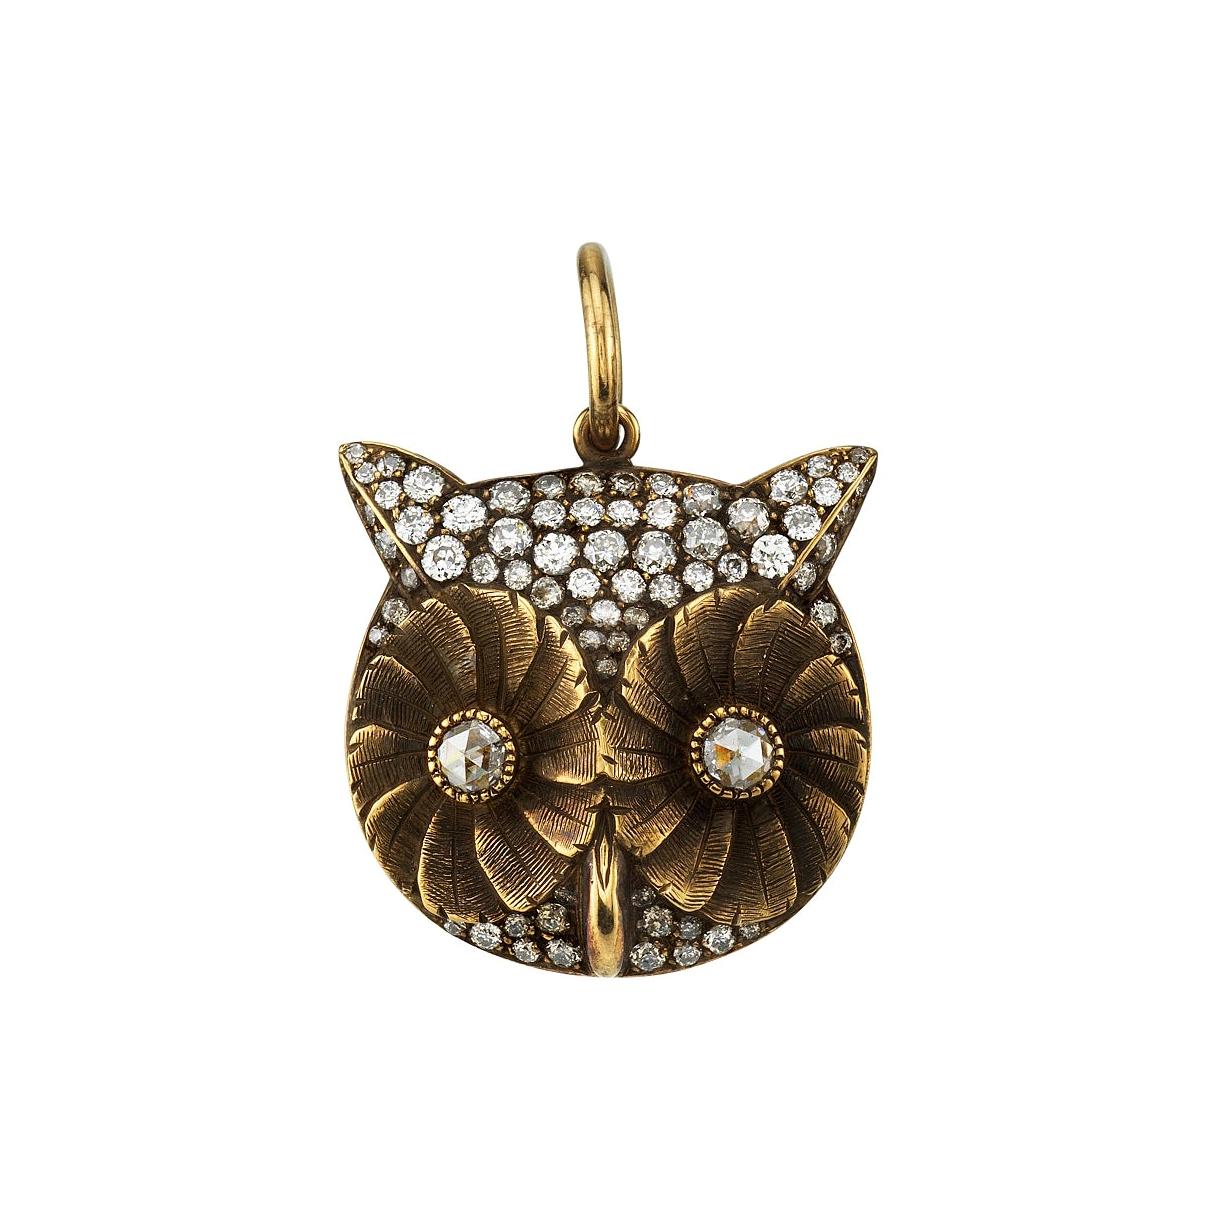 Approximately 0.70ctw G-H/VS  old European cut diamonds and 0.10ctw rose cut diamonds pavè set set in a handcrafted oxidized 18K yellow gold owl charm. 

Available in a polished or oxidized finish.

Price does not include chain.